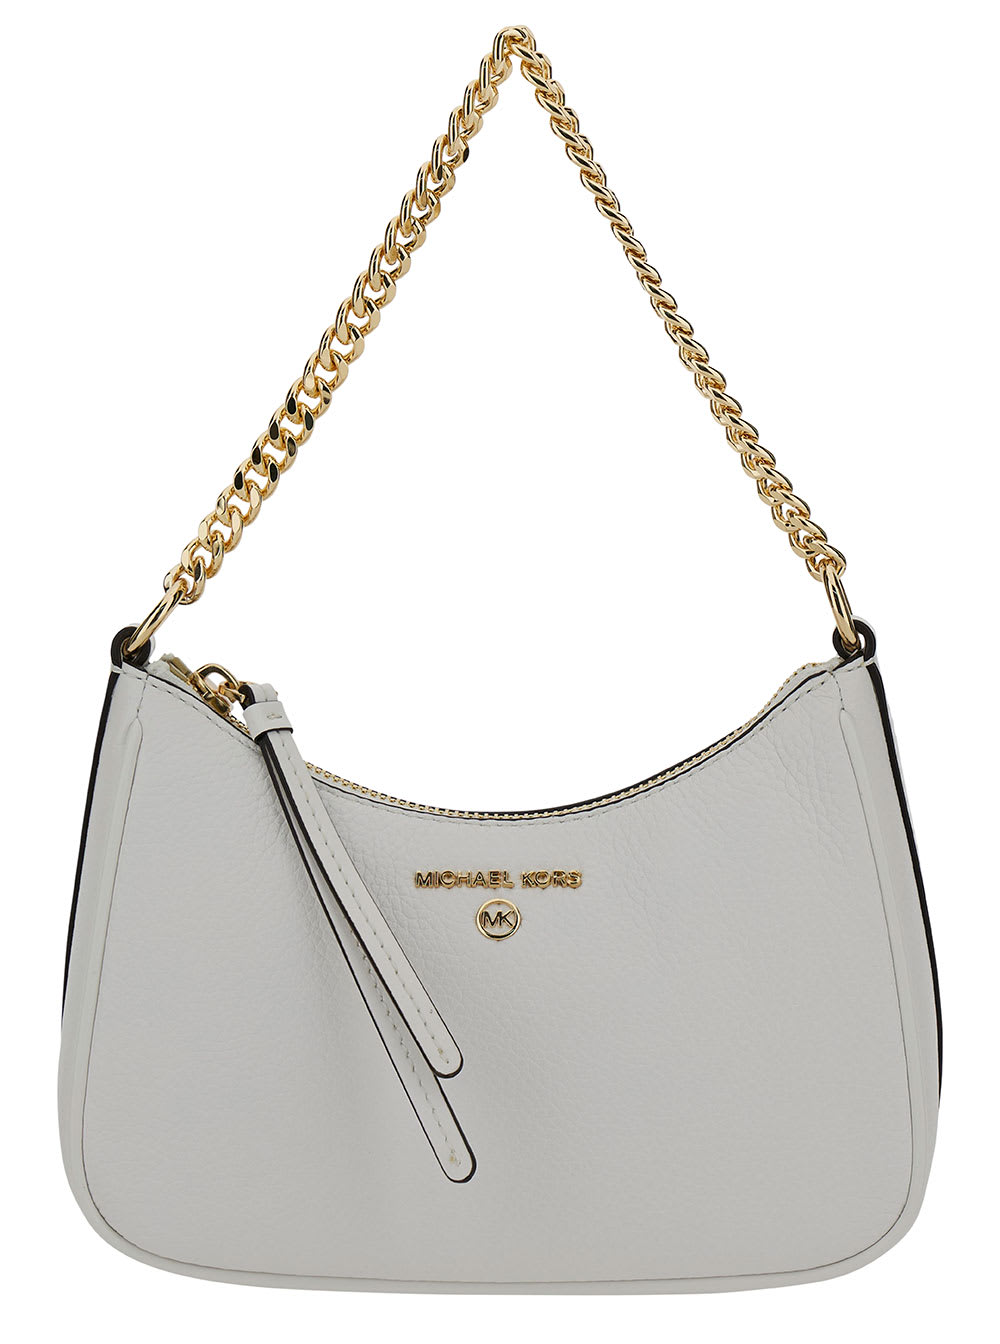 Michael Kors Shoulder Bag With Chain Strap And Logo Detail - White - female - Size: 0one size